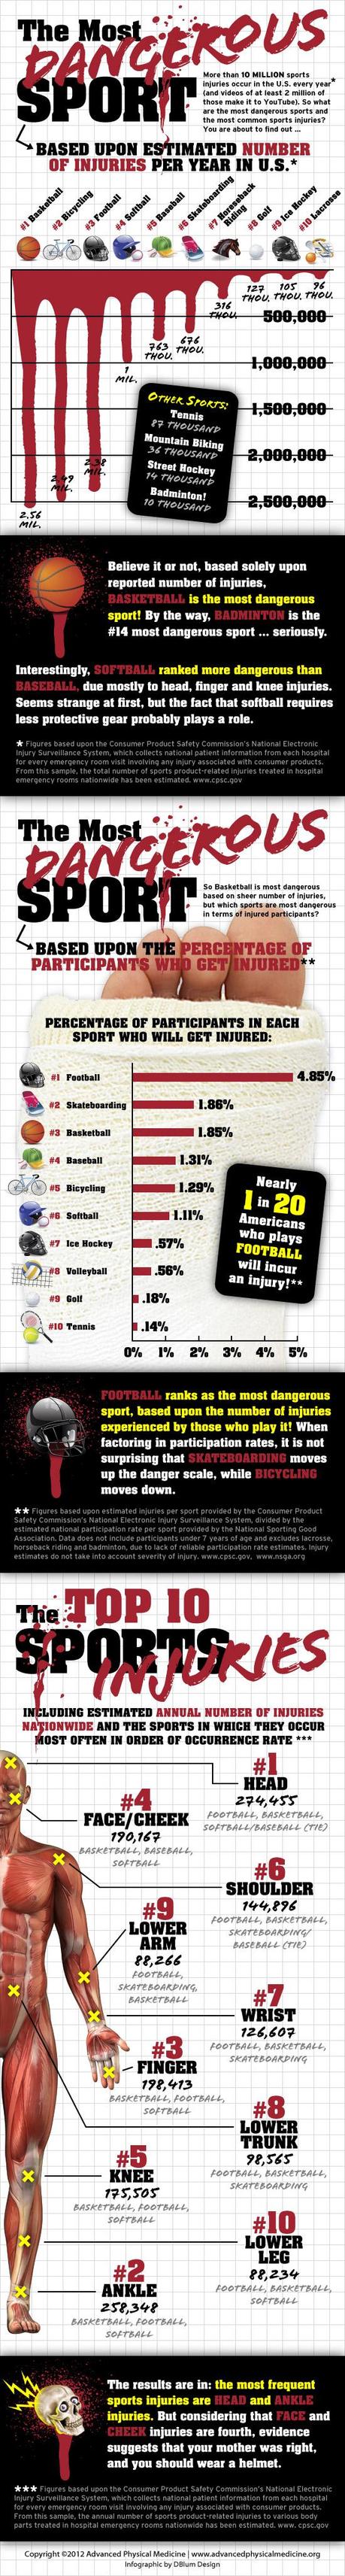 Infographic: Most Dangerous Sports